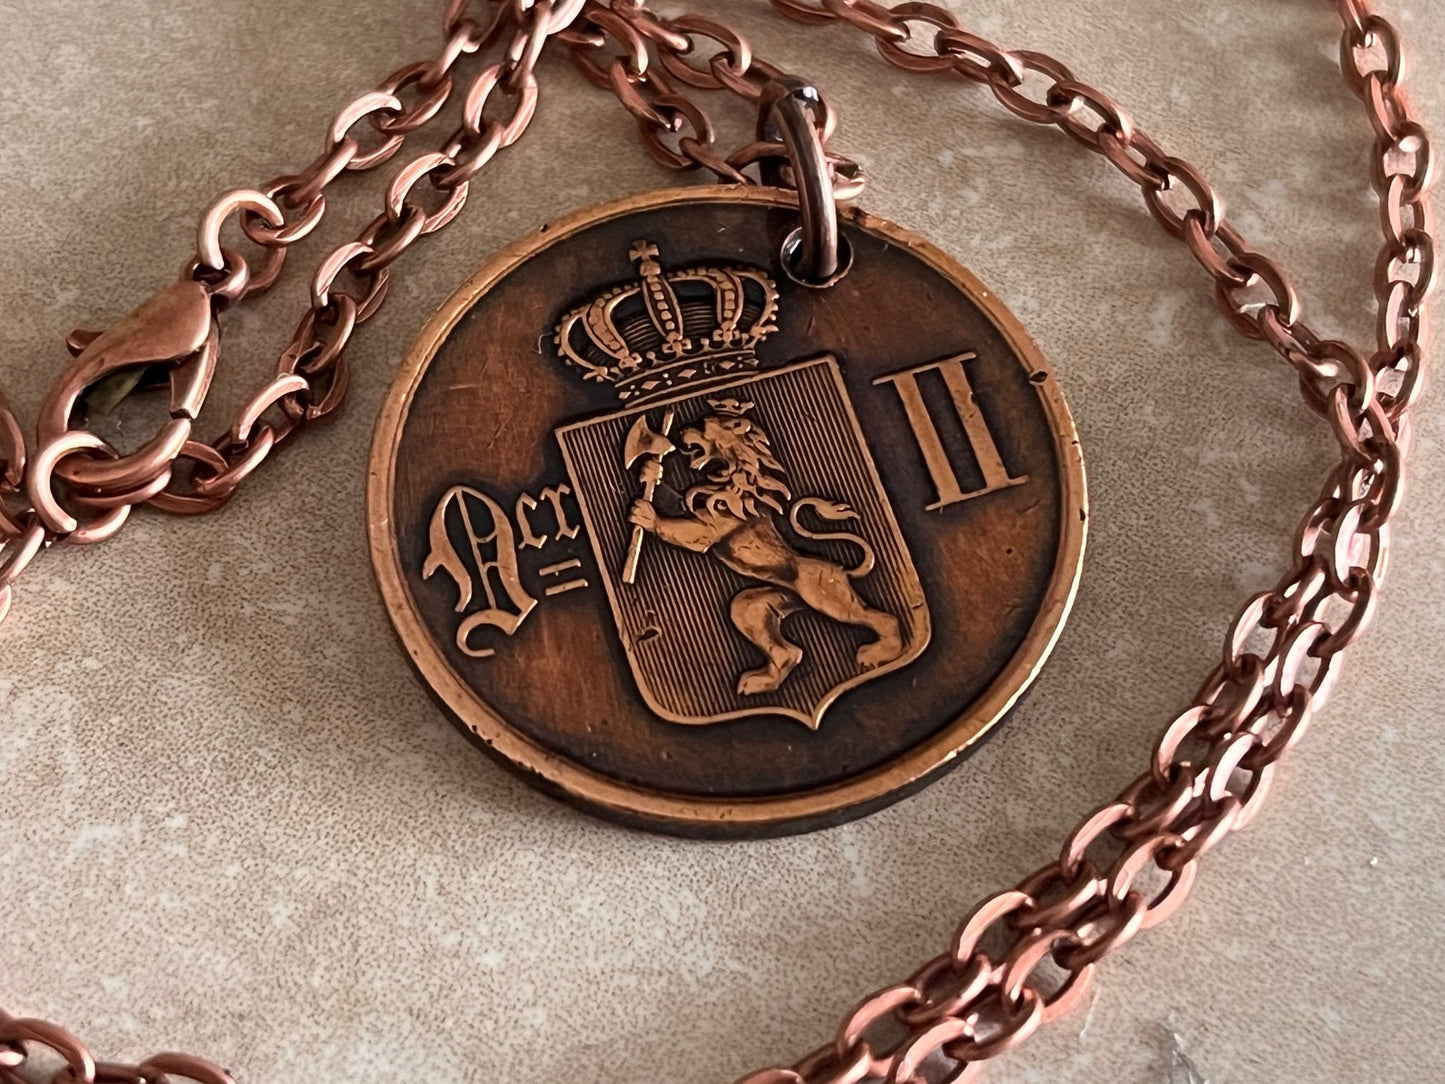 Norway Coin Pendant 5 Ore Crown Personal Necklace Old Vintage Handmade Jewelry Gift Friend Charm For Him Her World Coin Collector